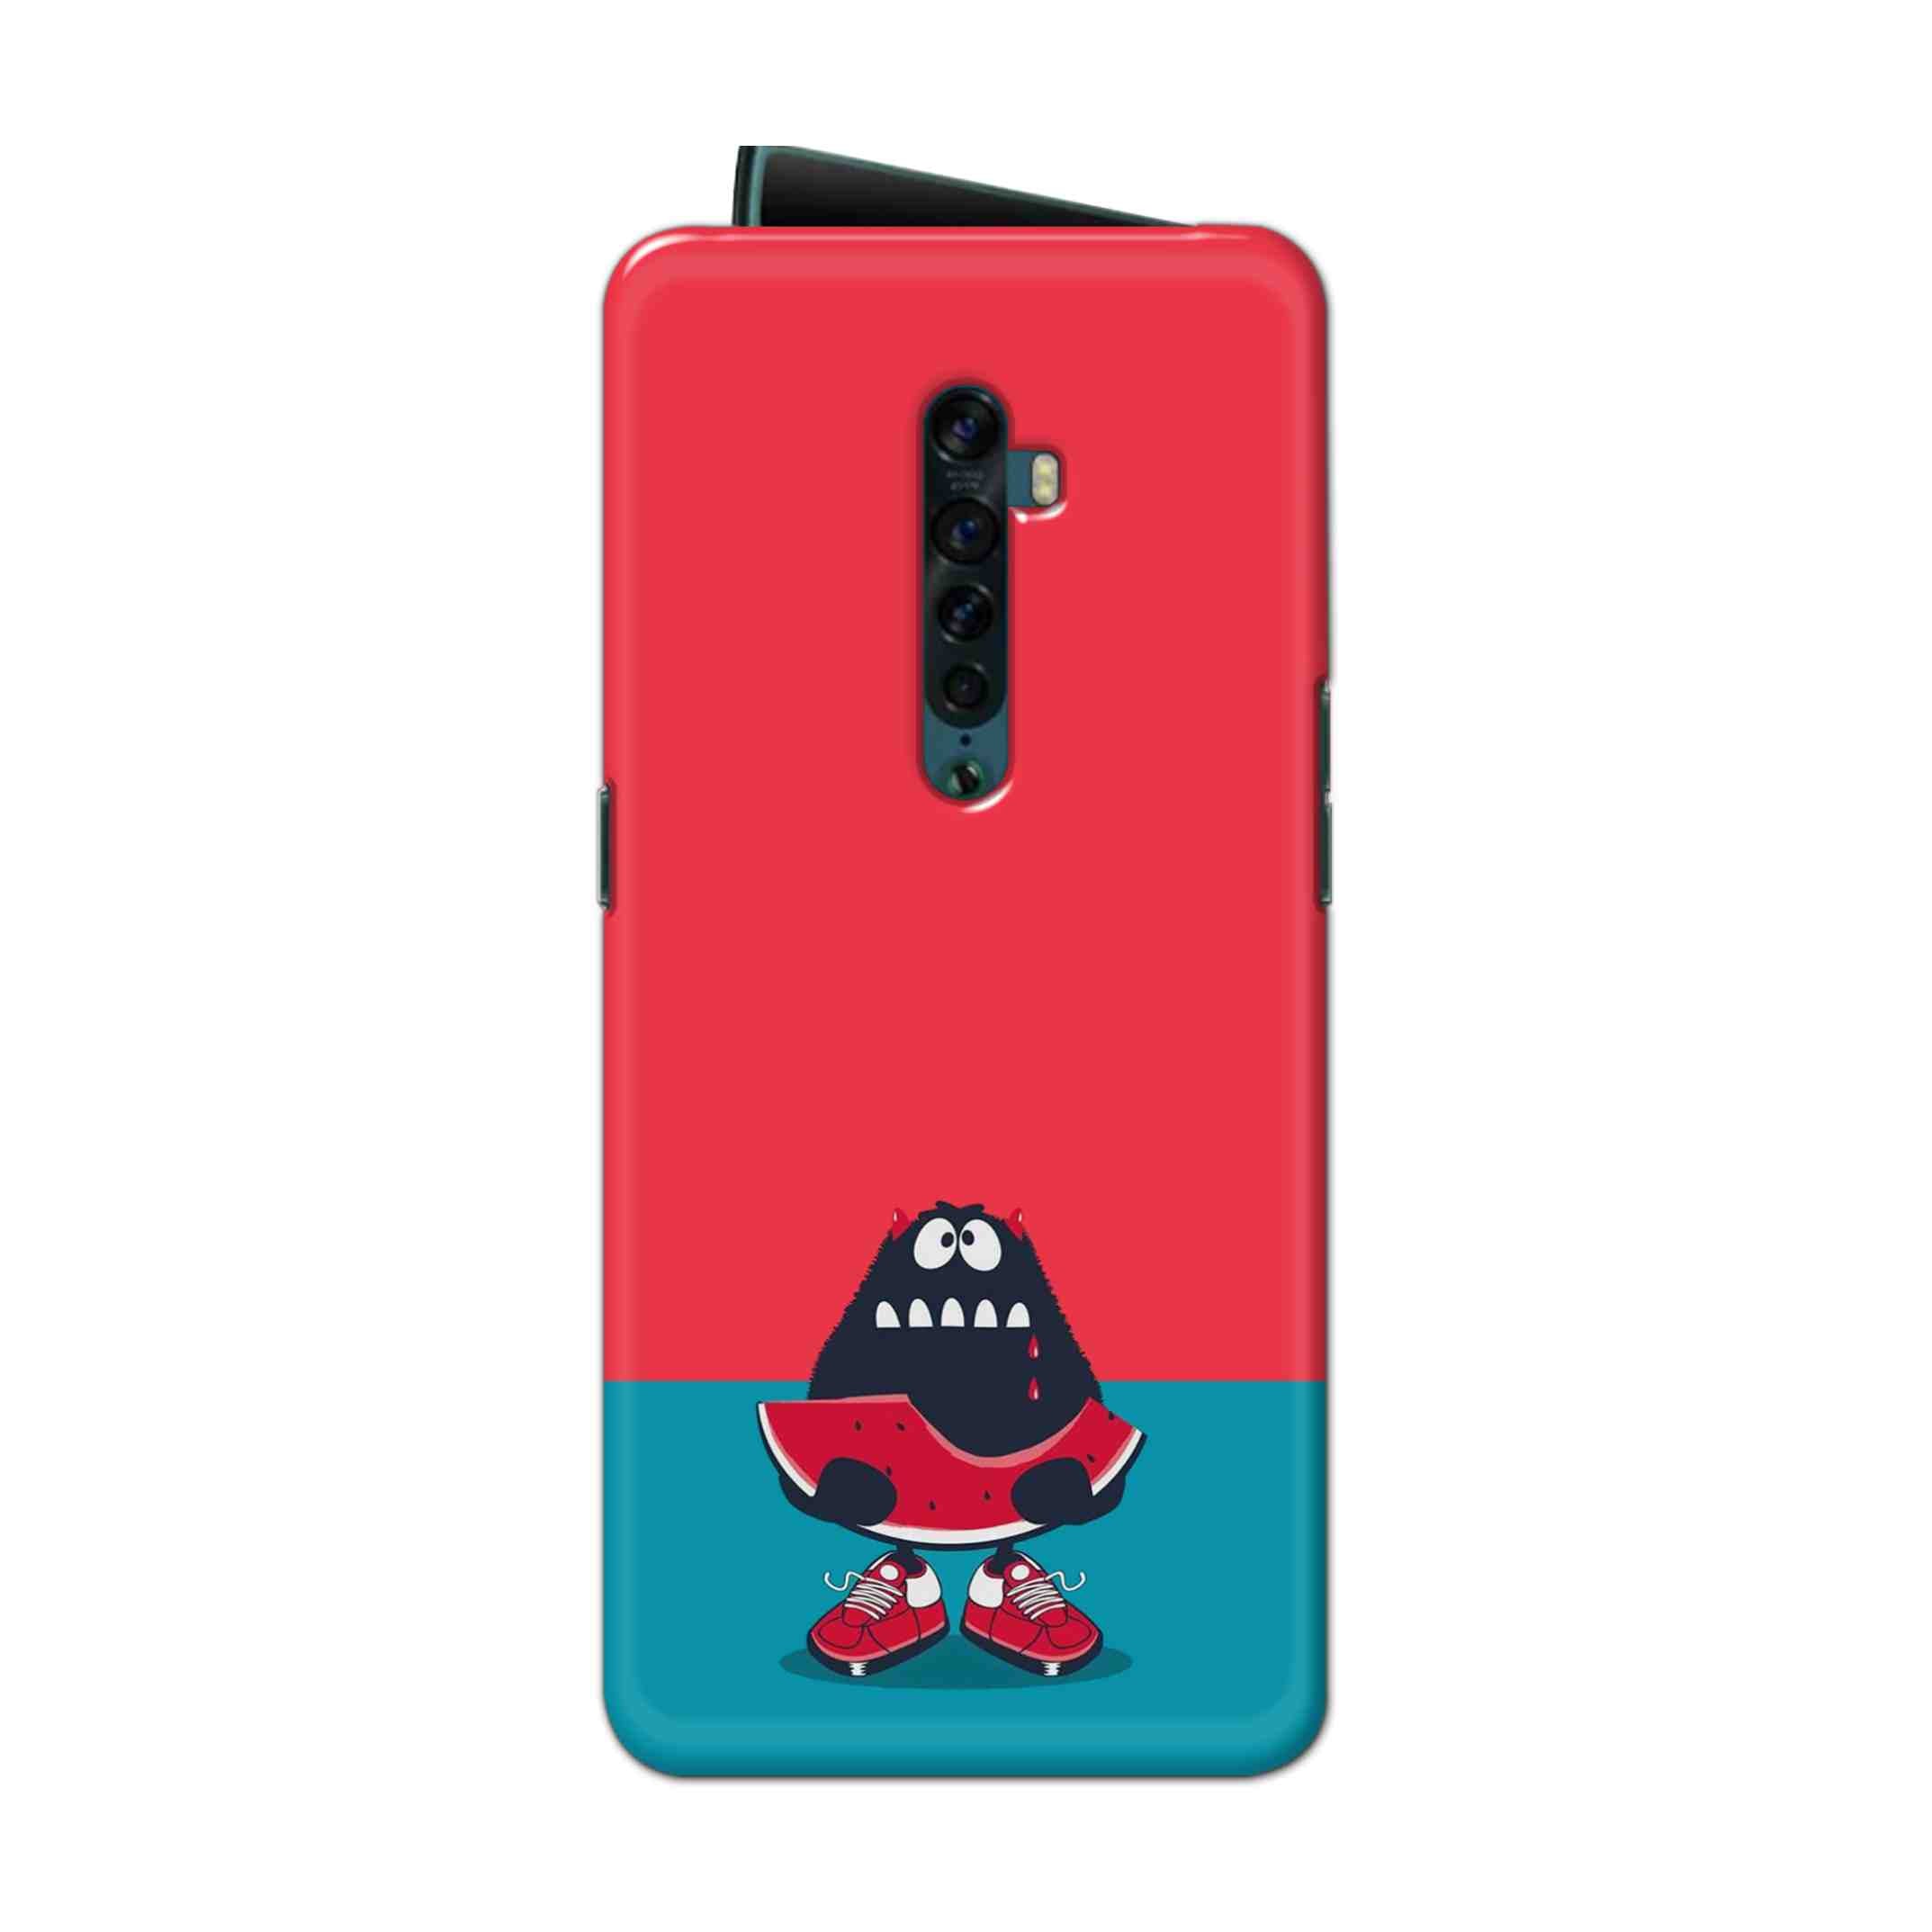 Buy Watermelon Hard Back Mobile Phone Case Cover For Oppo Reno 2 Online